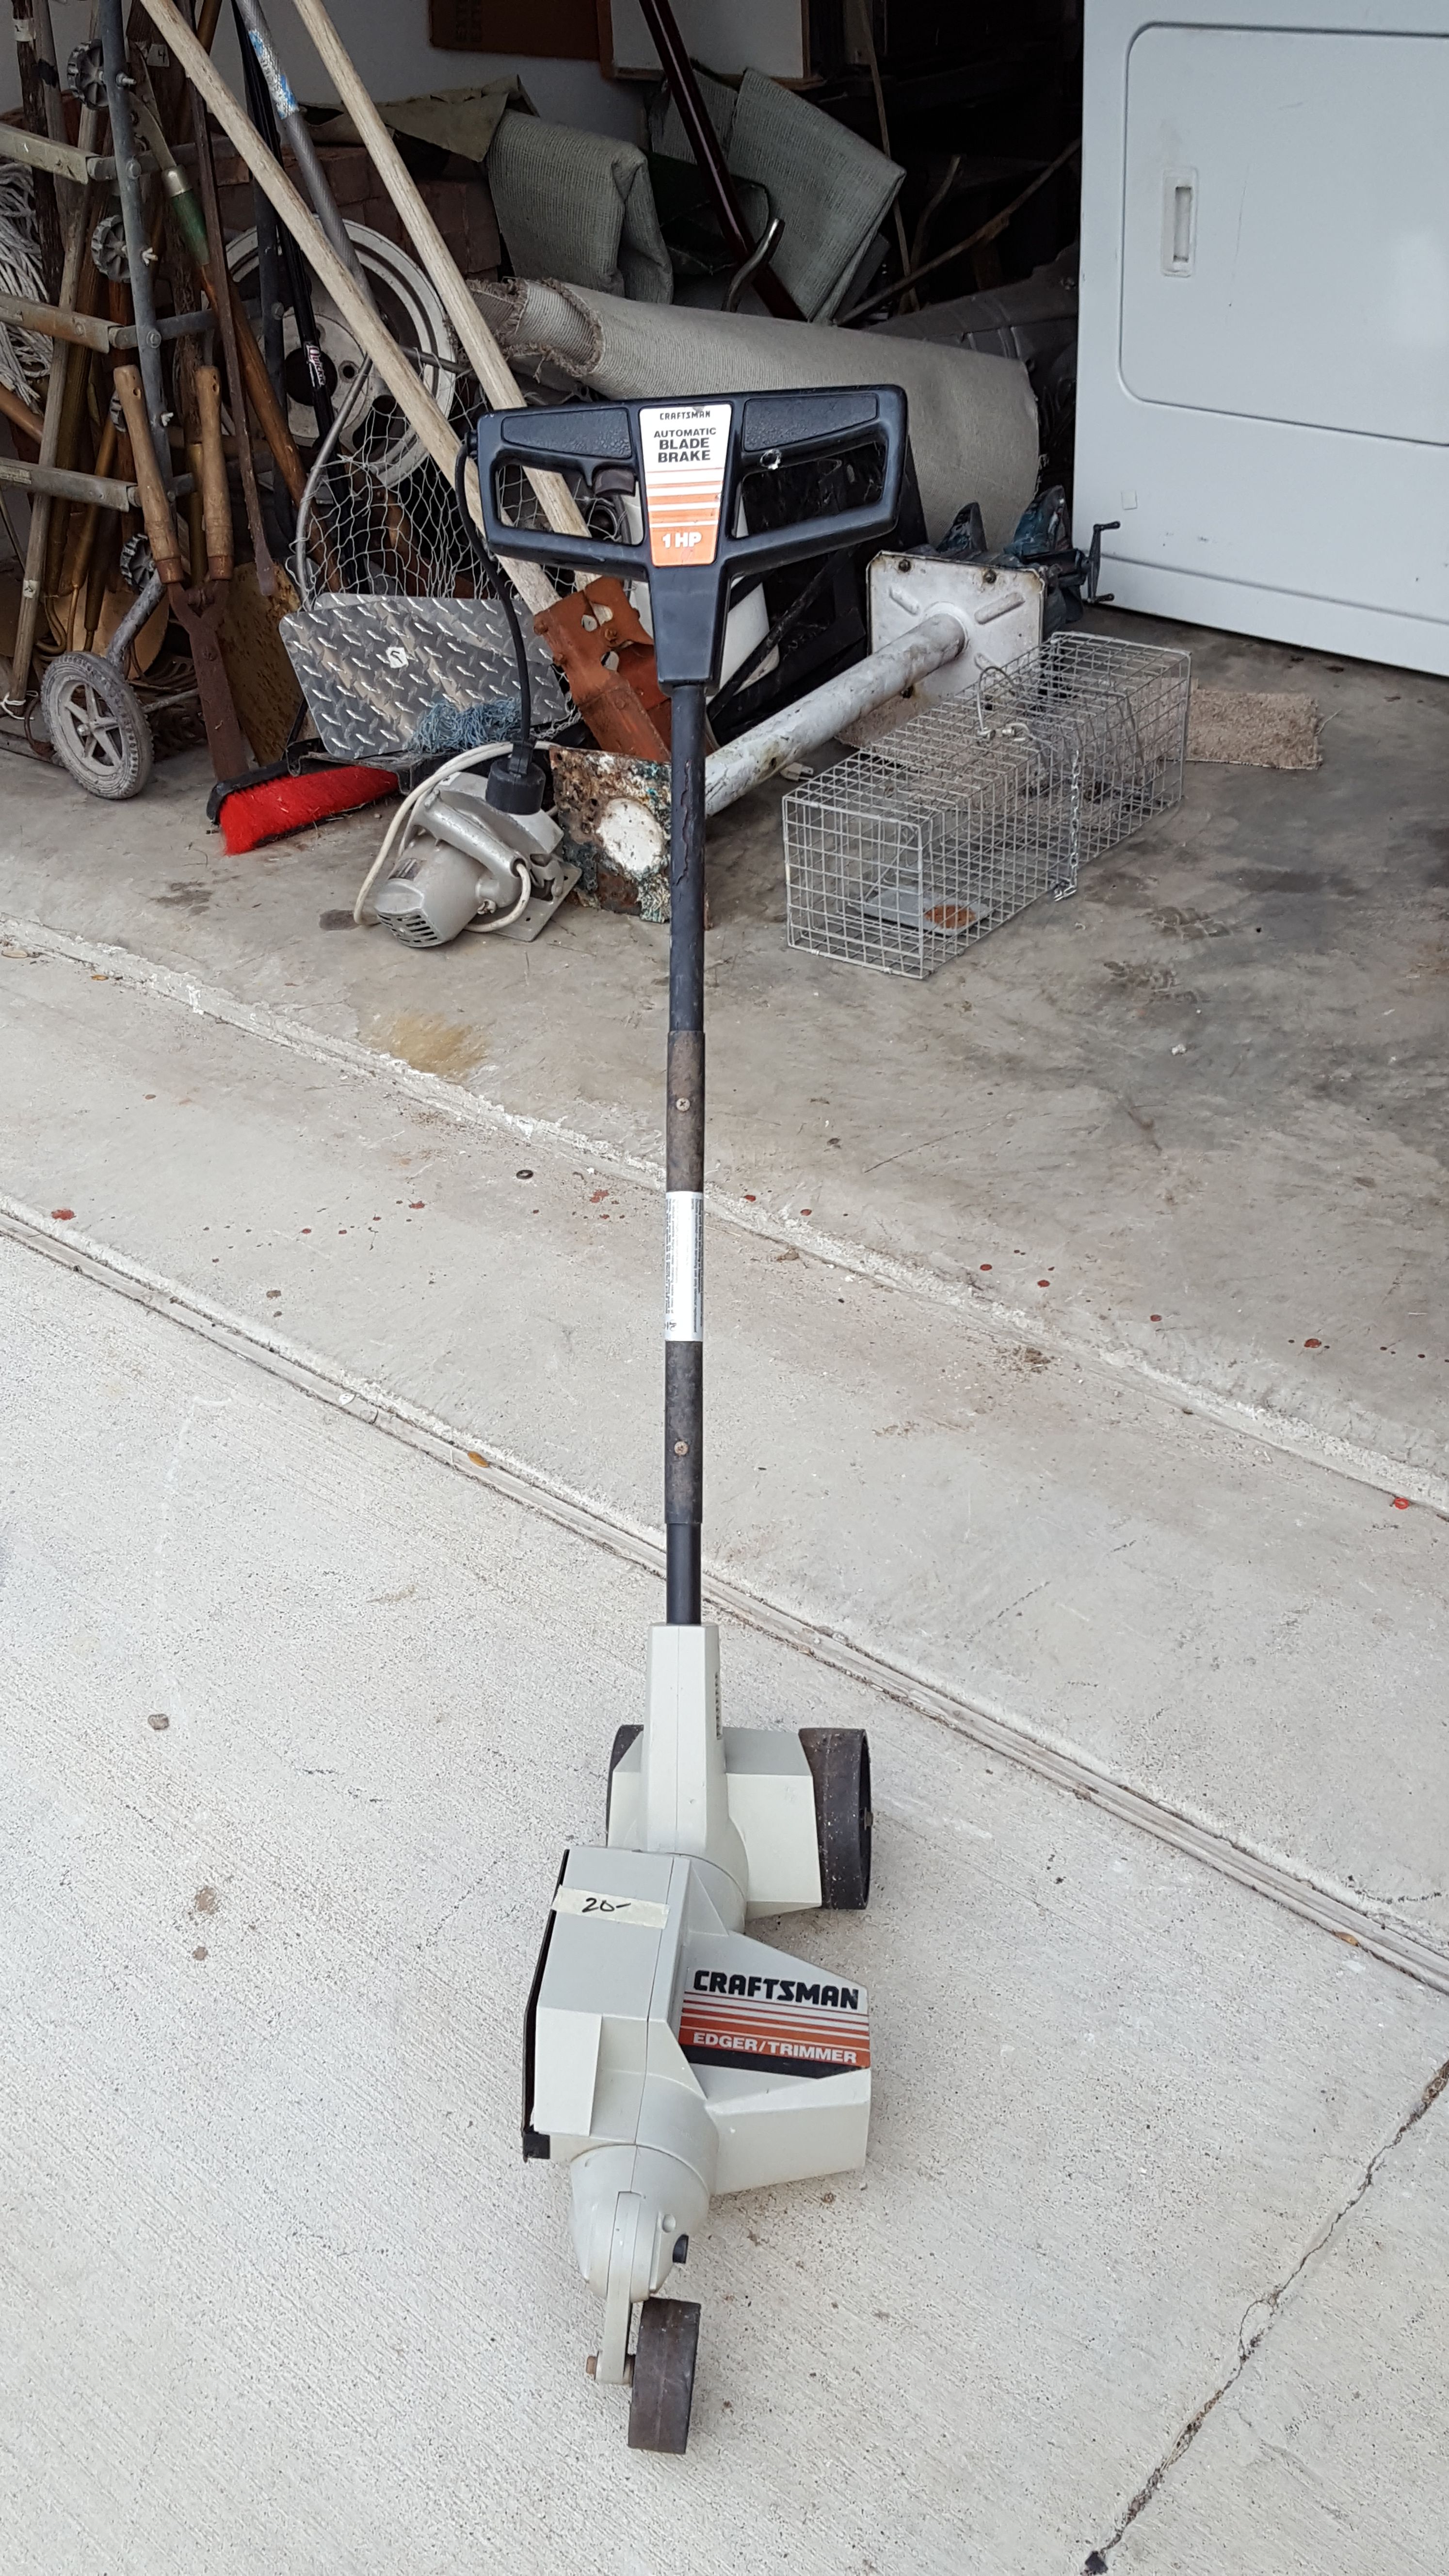 Craftsman 1hp electric trimmer works great